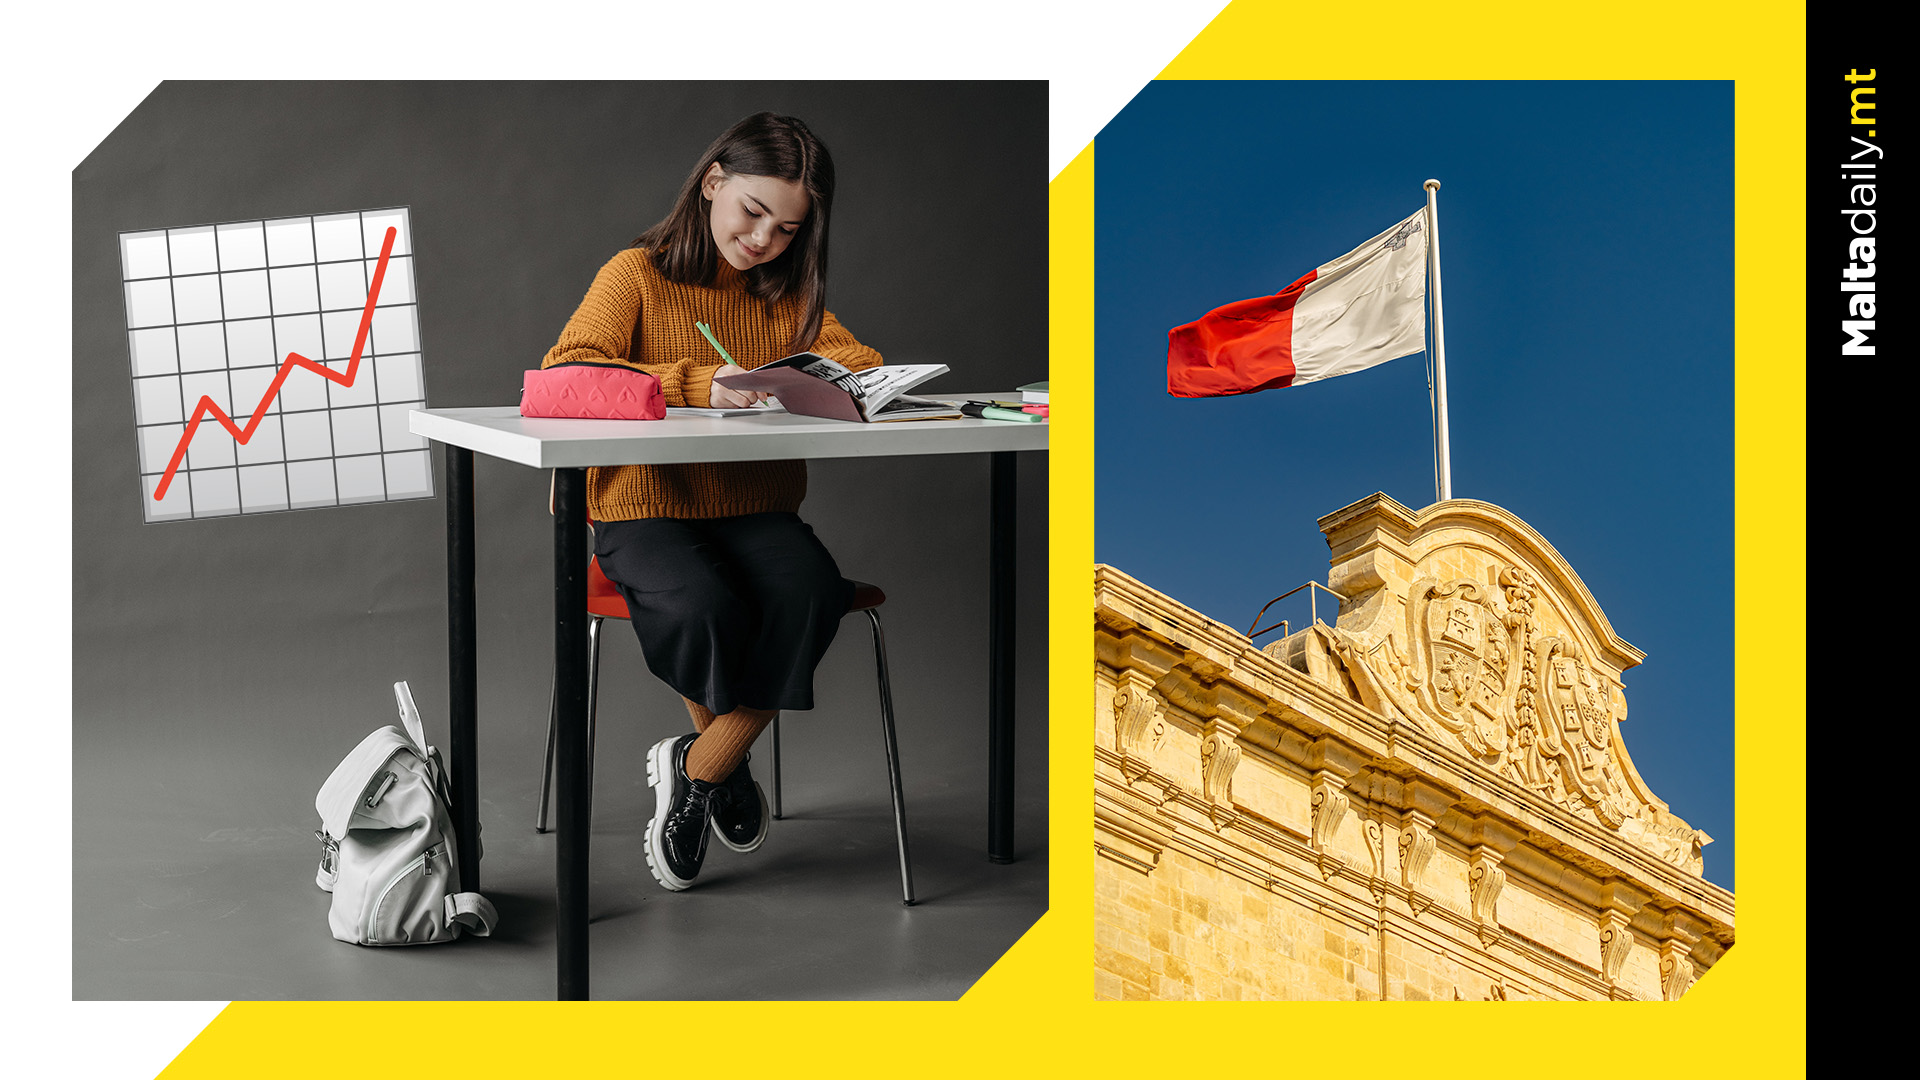 Maltese students most improved in the world in reading, report says